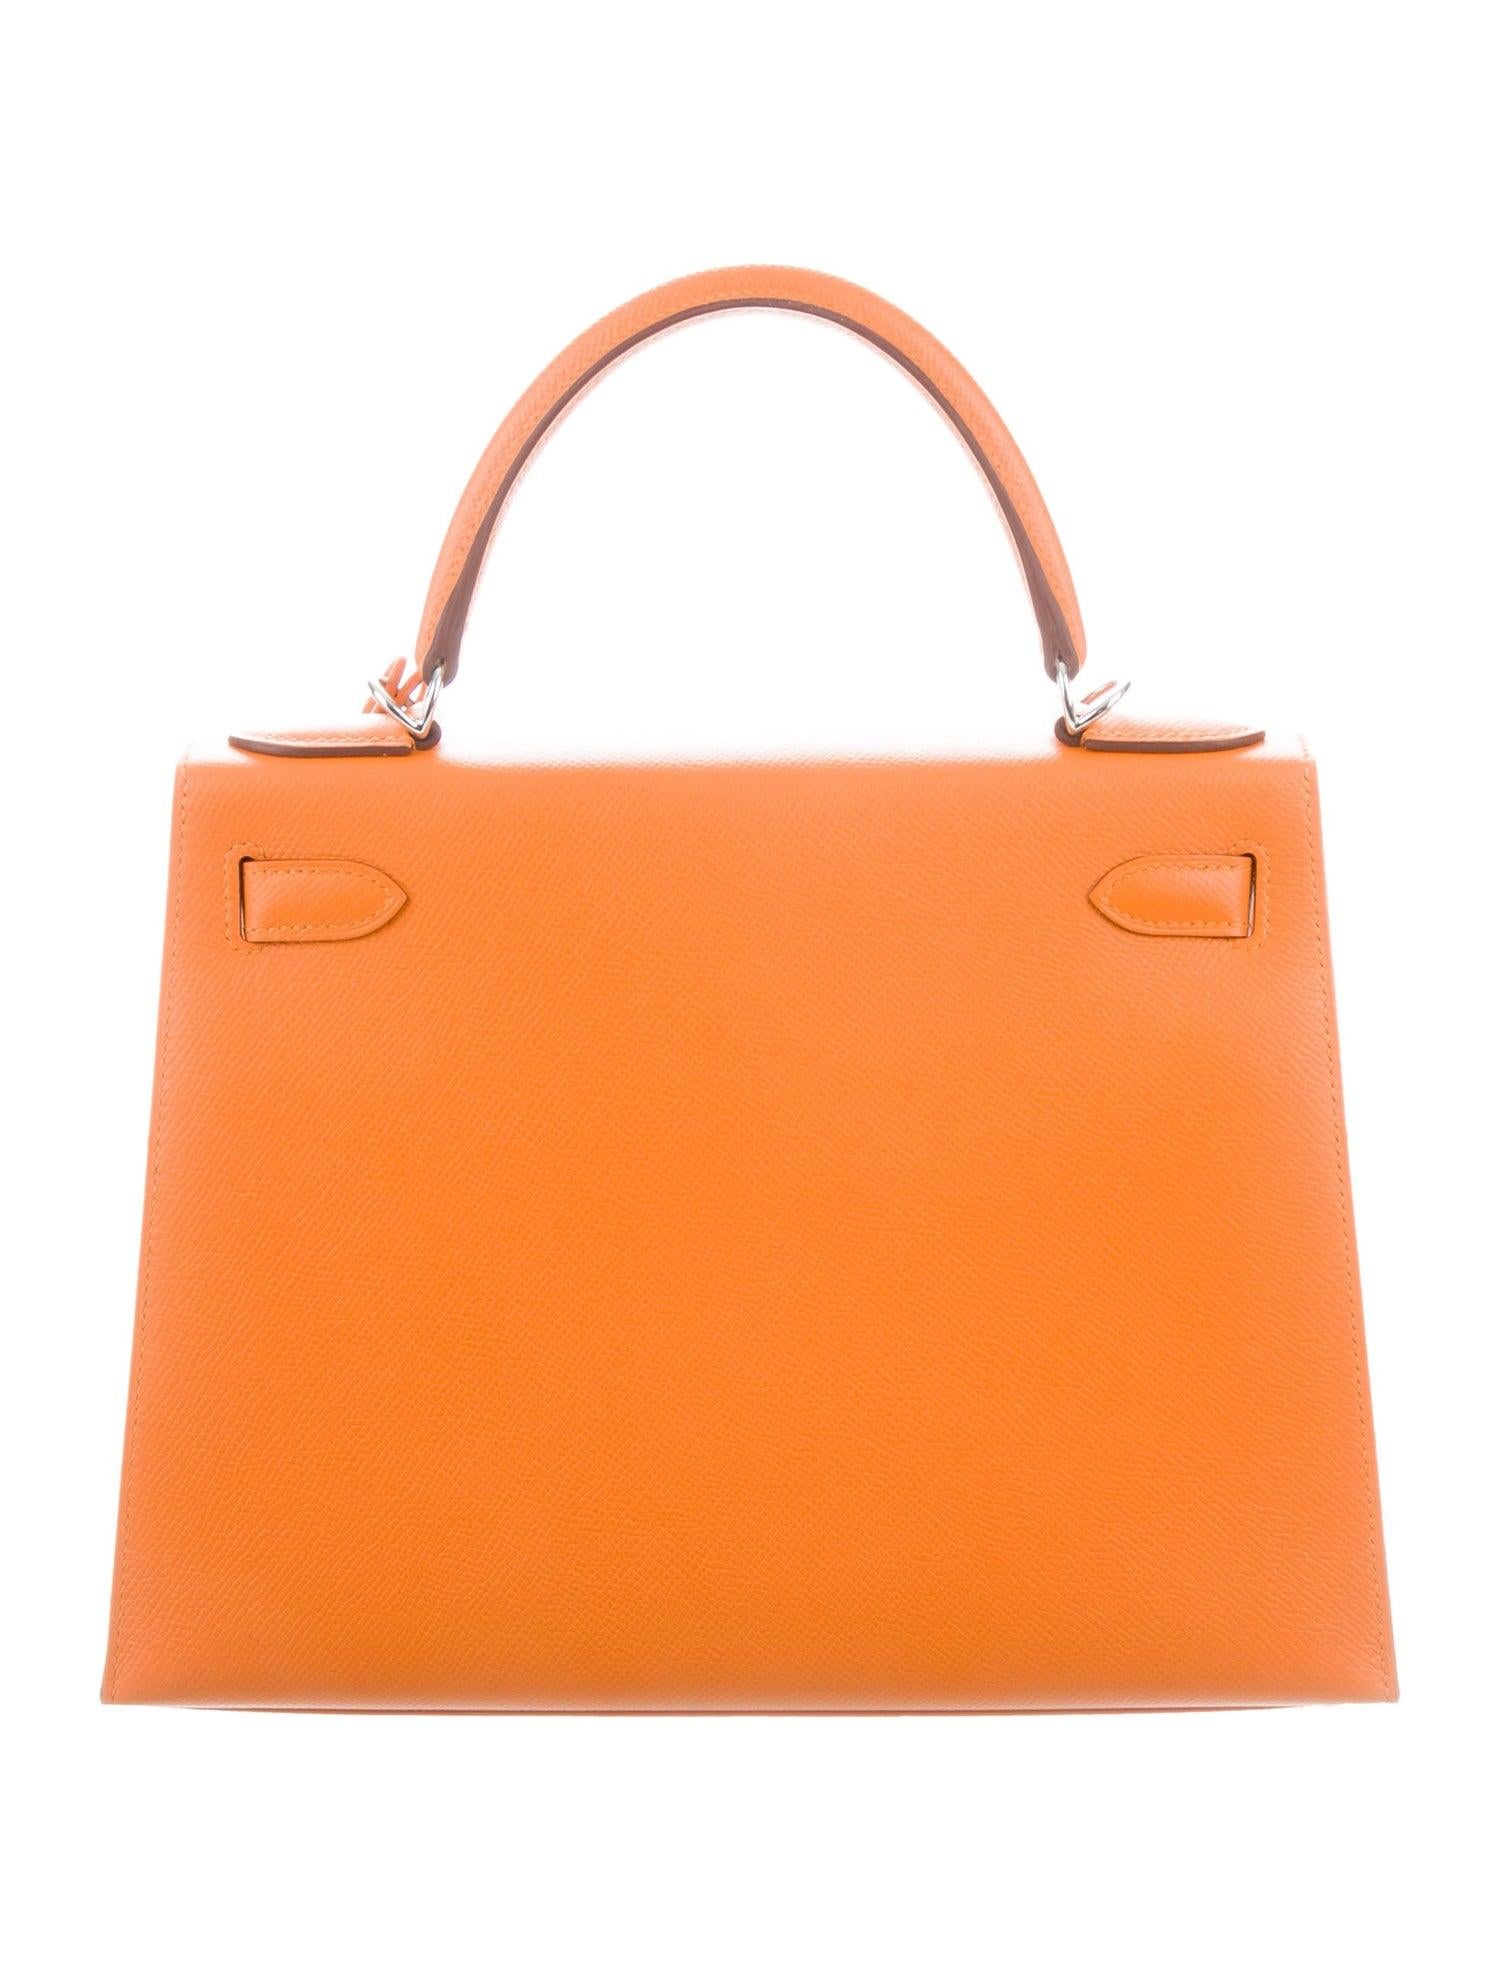 Hermes NEW Kelly 28 Orange Lettres Palladium Top Handle Tote Shoulder Bag in Box
 
Leather
Palladium-plated hardware
Leather lining
Turn-lock closure
Made in France
Date code present (2018)
Top Handle drop 3.5